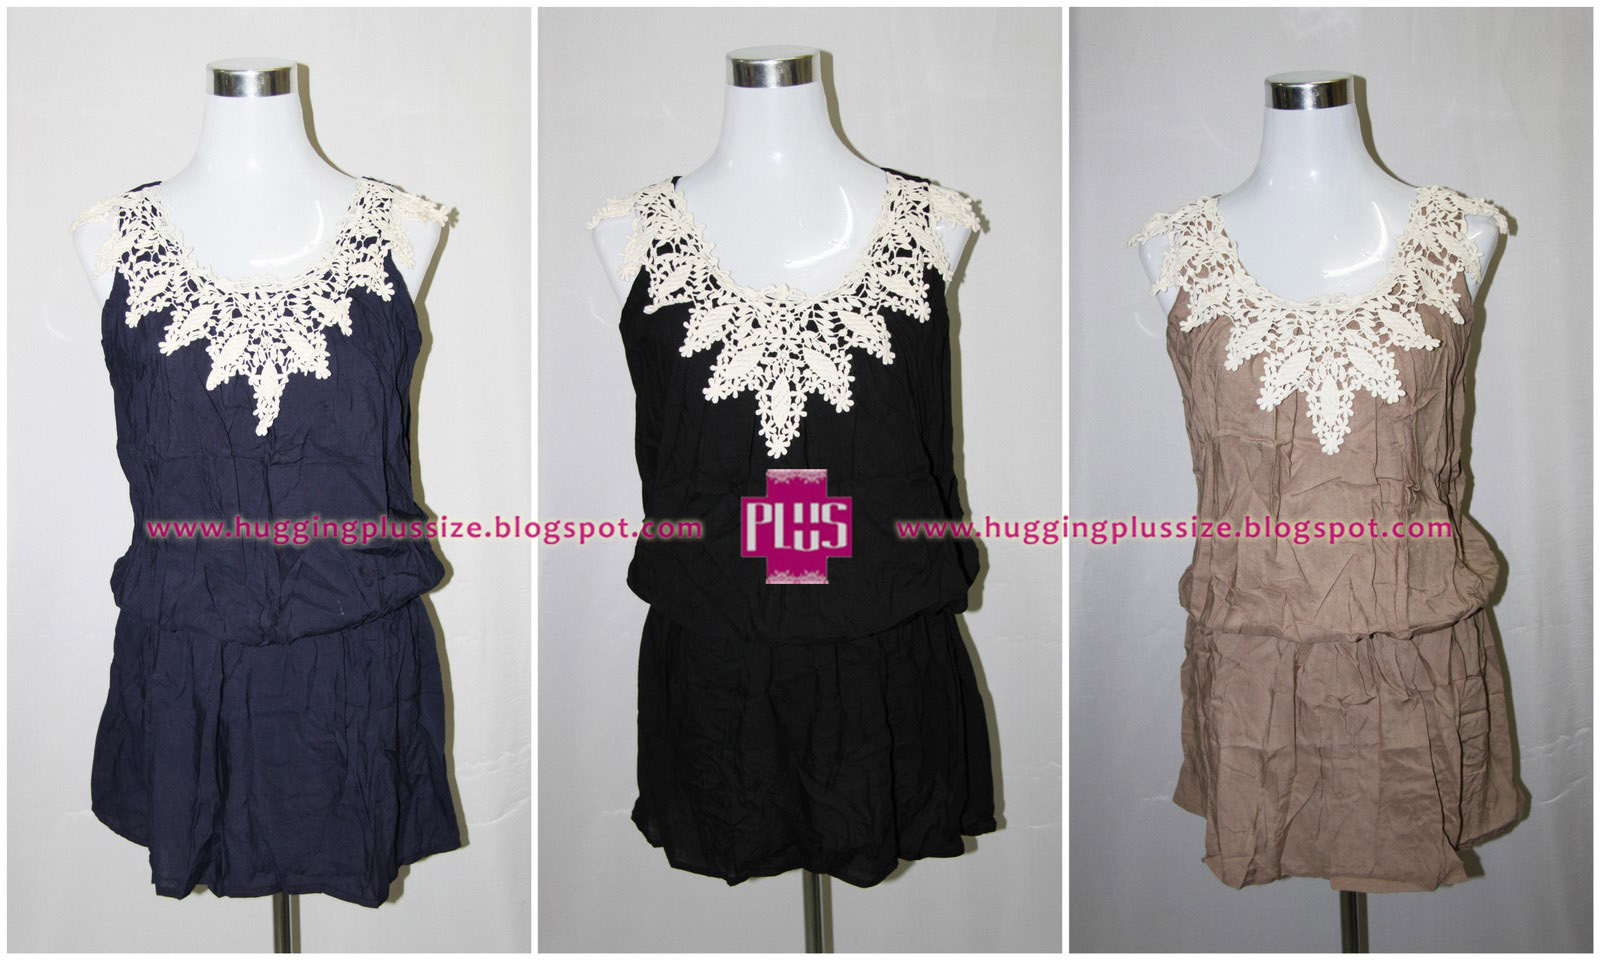 Buy 2 get 1 free sale Knitted women lace crochet top by AndyVeEirn